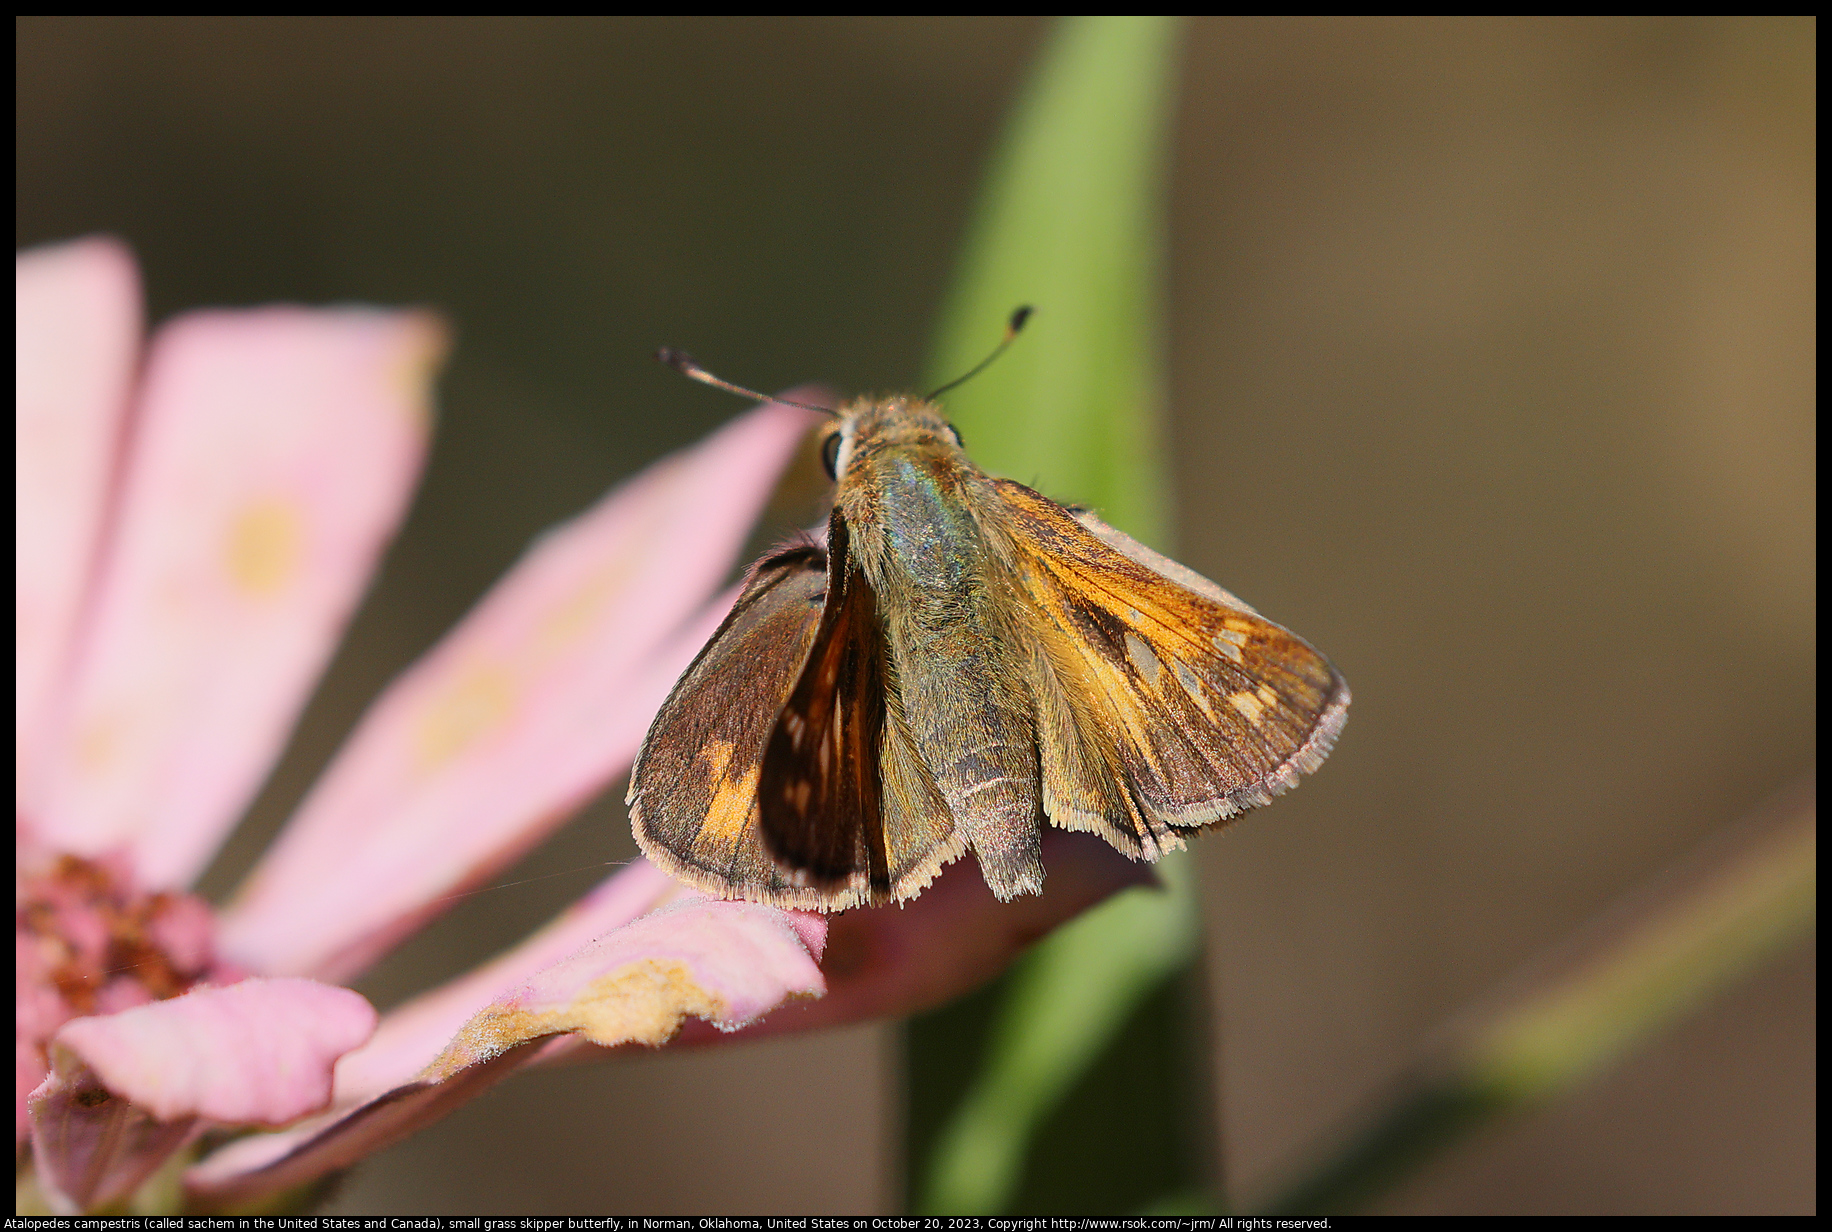 Atalopedes campestris (called sachem in the United States and Canada), small grass skipper butterfly, in Norman, Oklahoma, United States on October 20, 2023